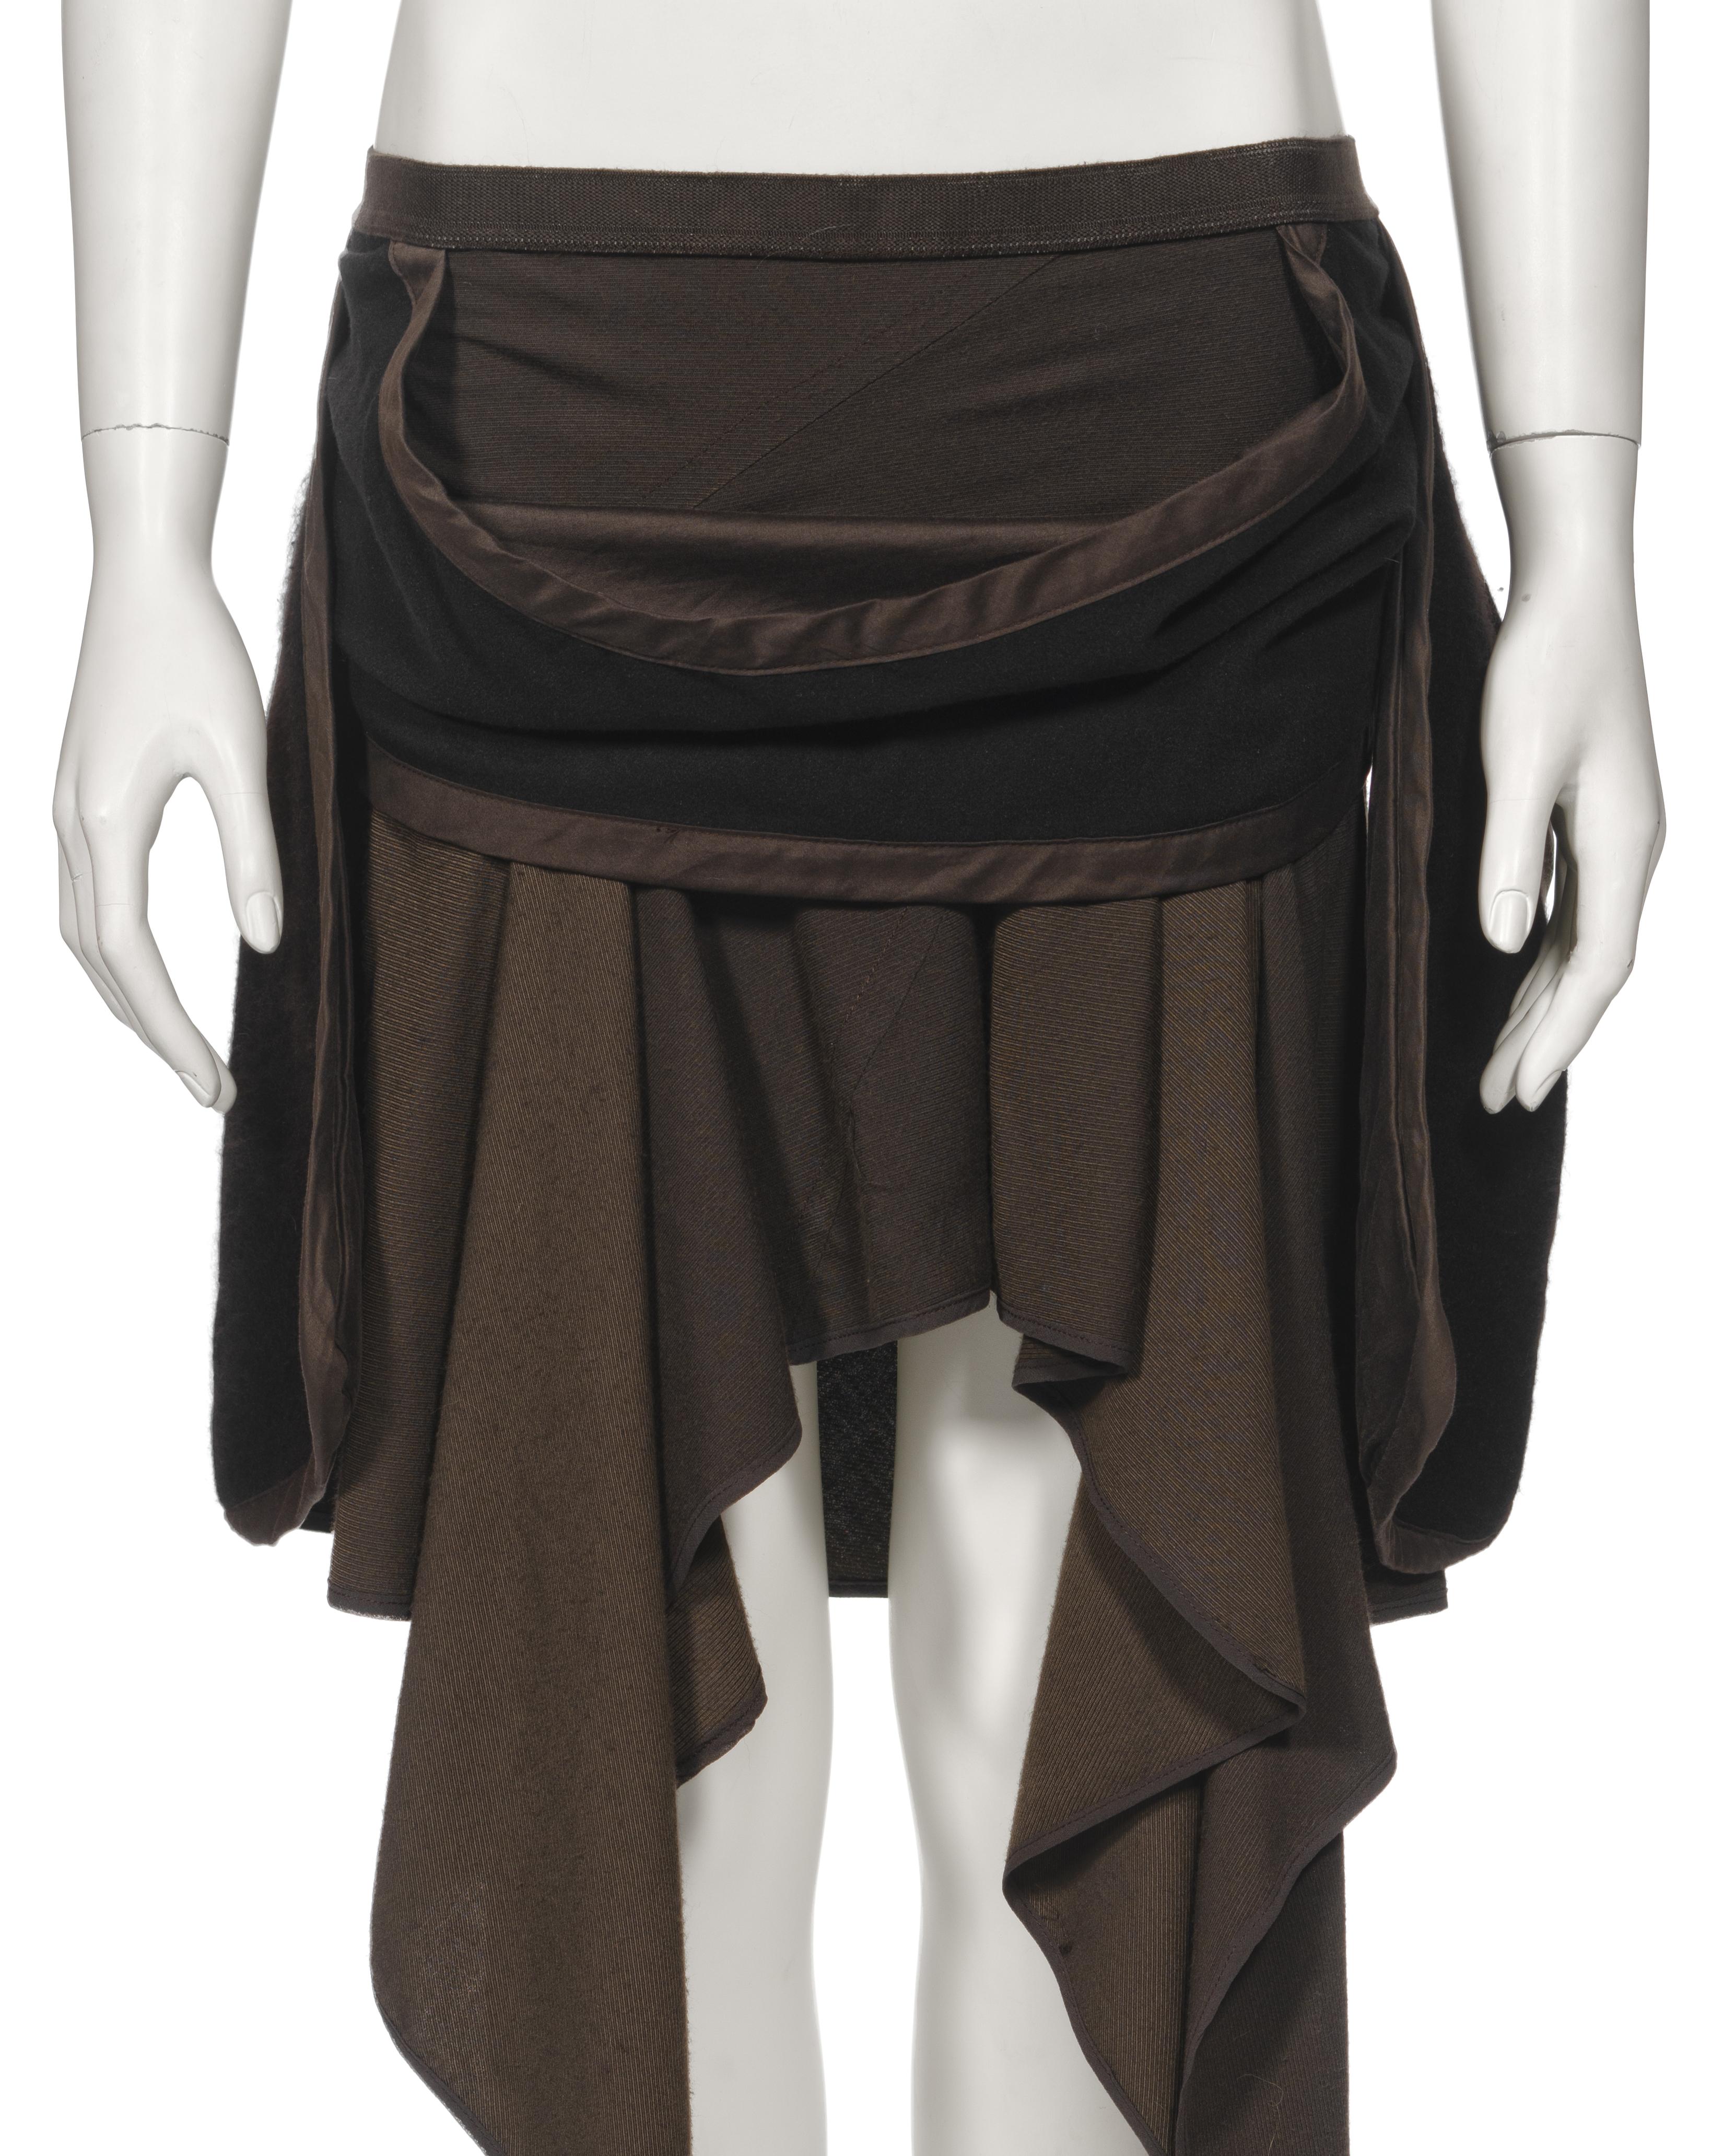 Rick Owens Angora Jacket and Cashmere Skirt 'Queen' Ensemble, fw 2004 For Sale 2